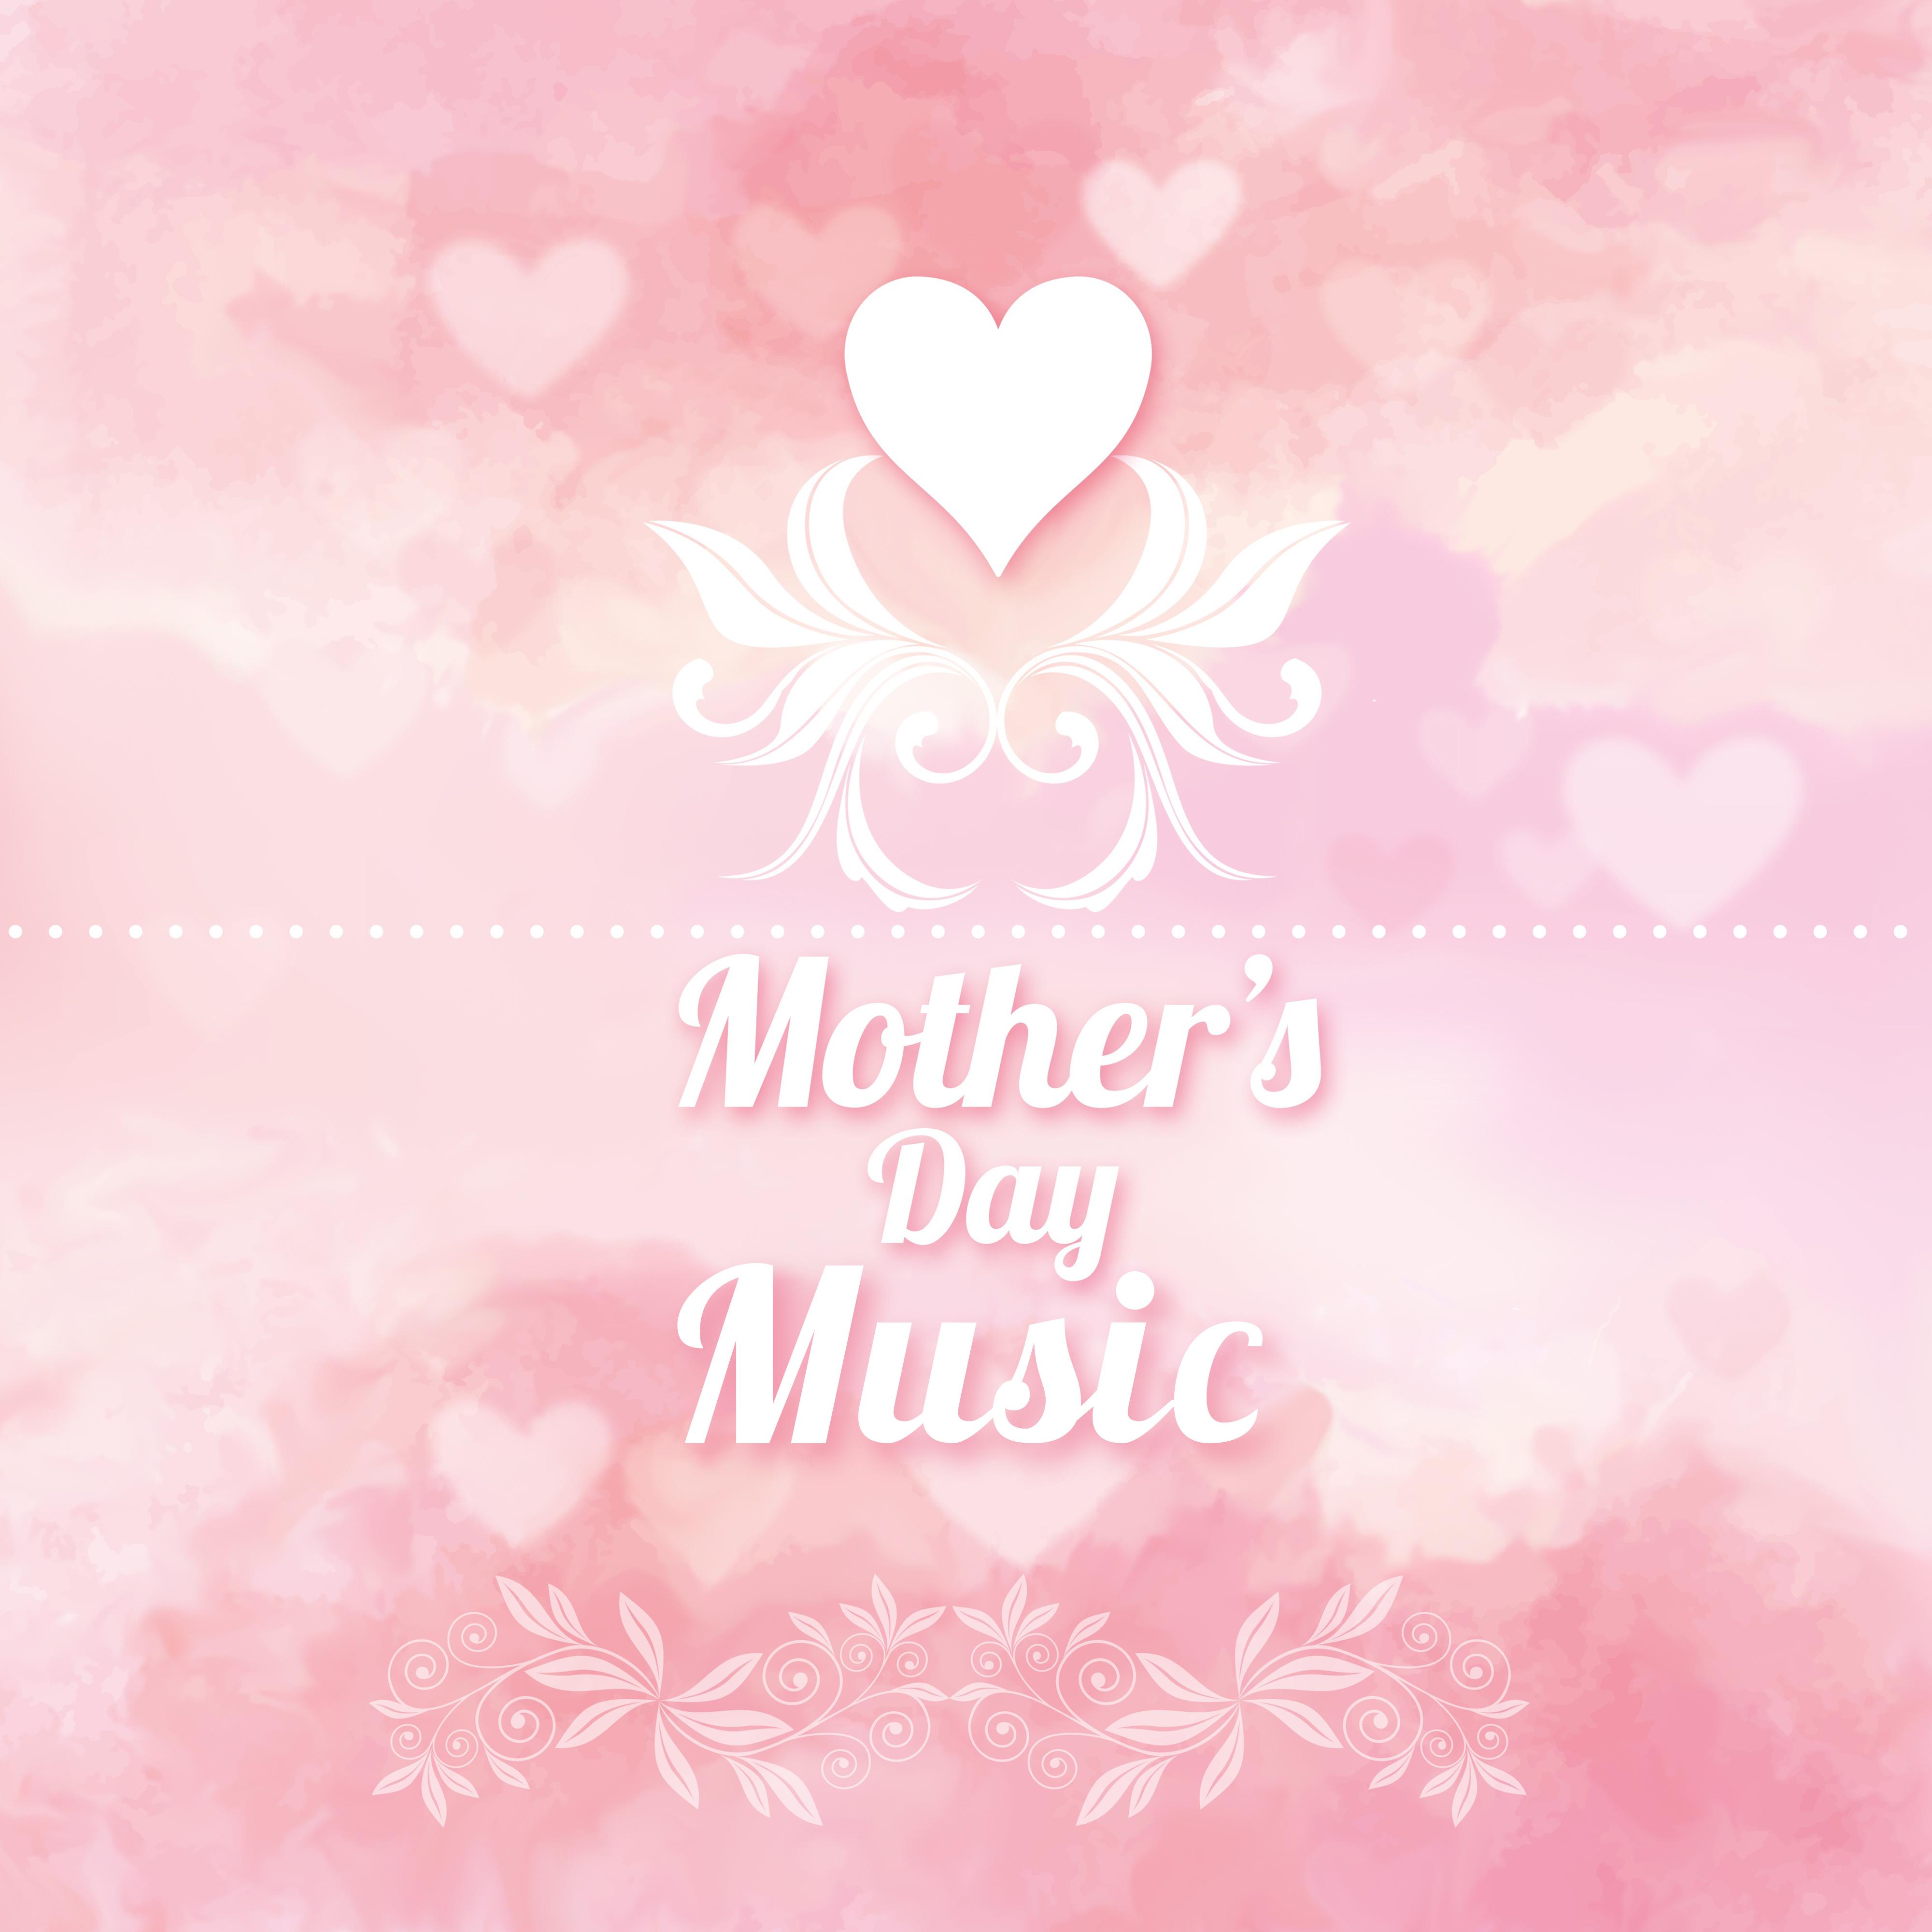 Mother' s Day Music  Instrumental Piano Music 2017 for Relaxation, Beautiful Songs, Lovely Time for Mom